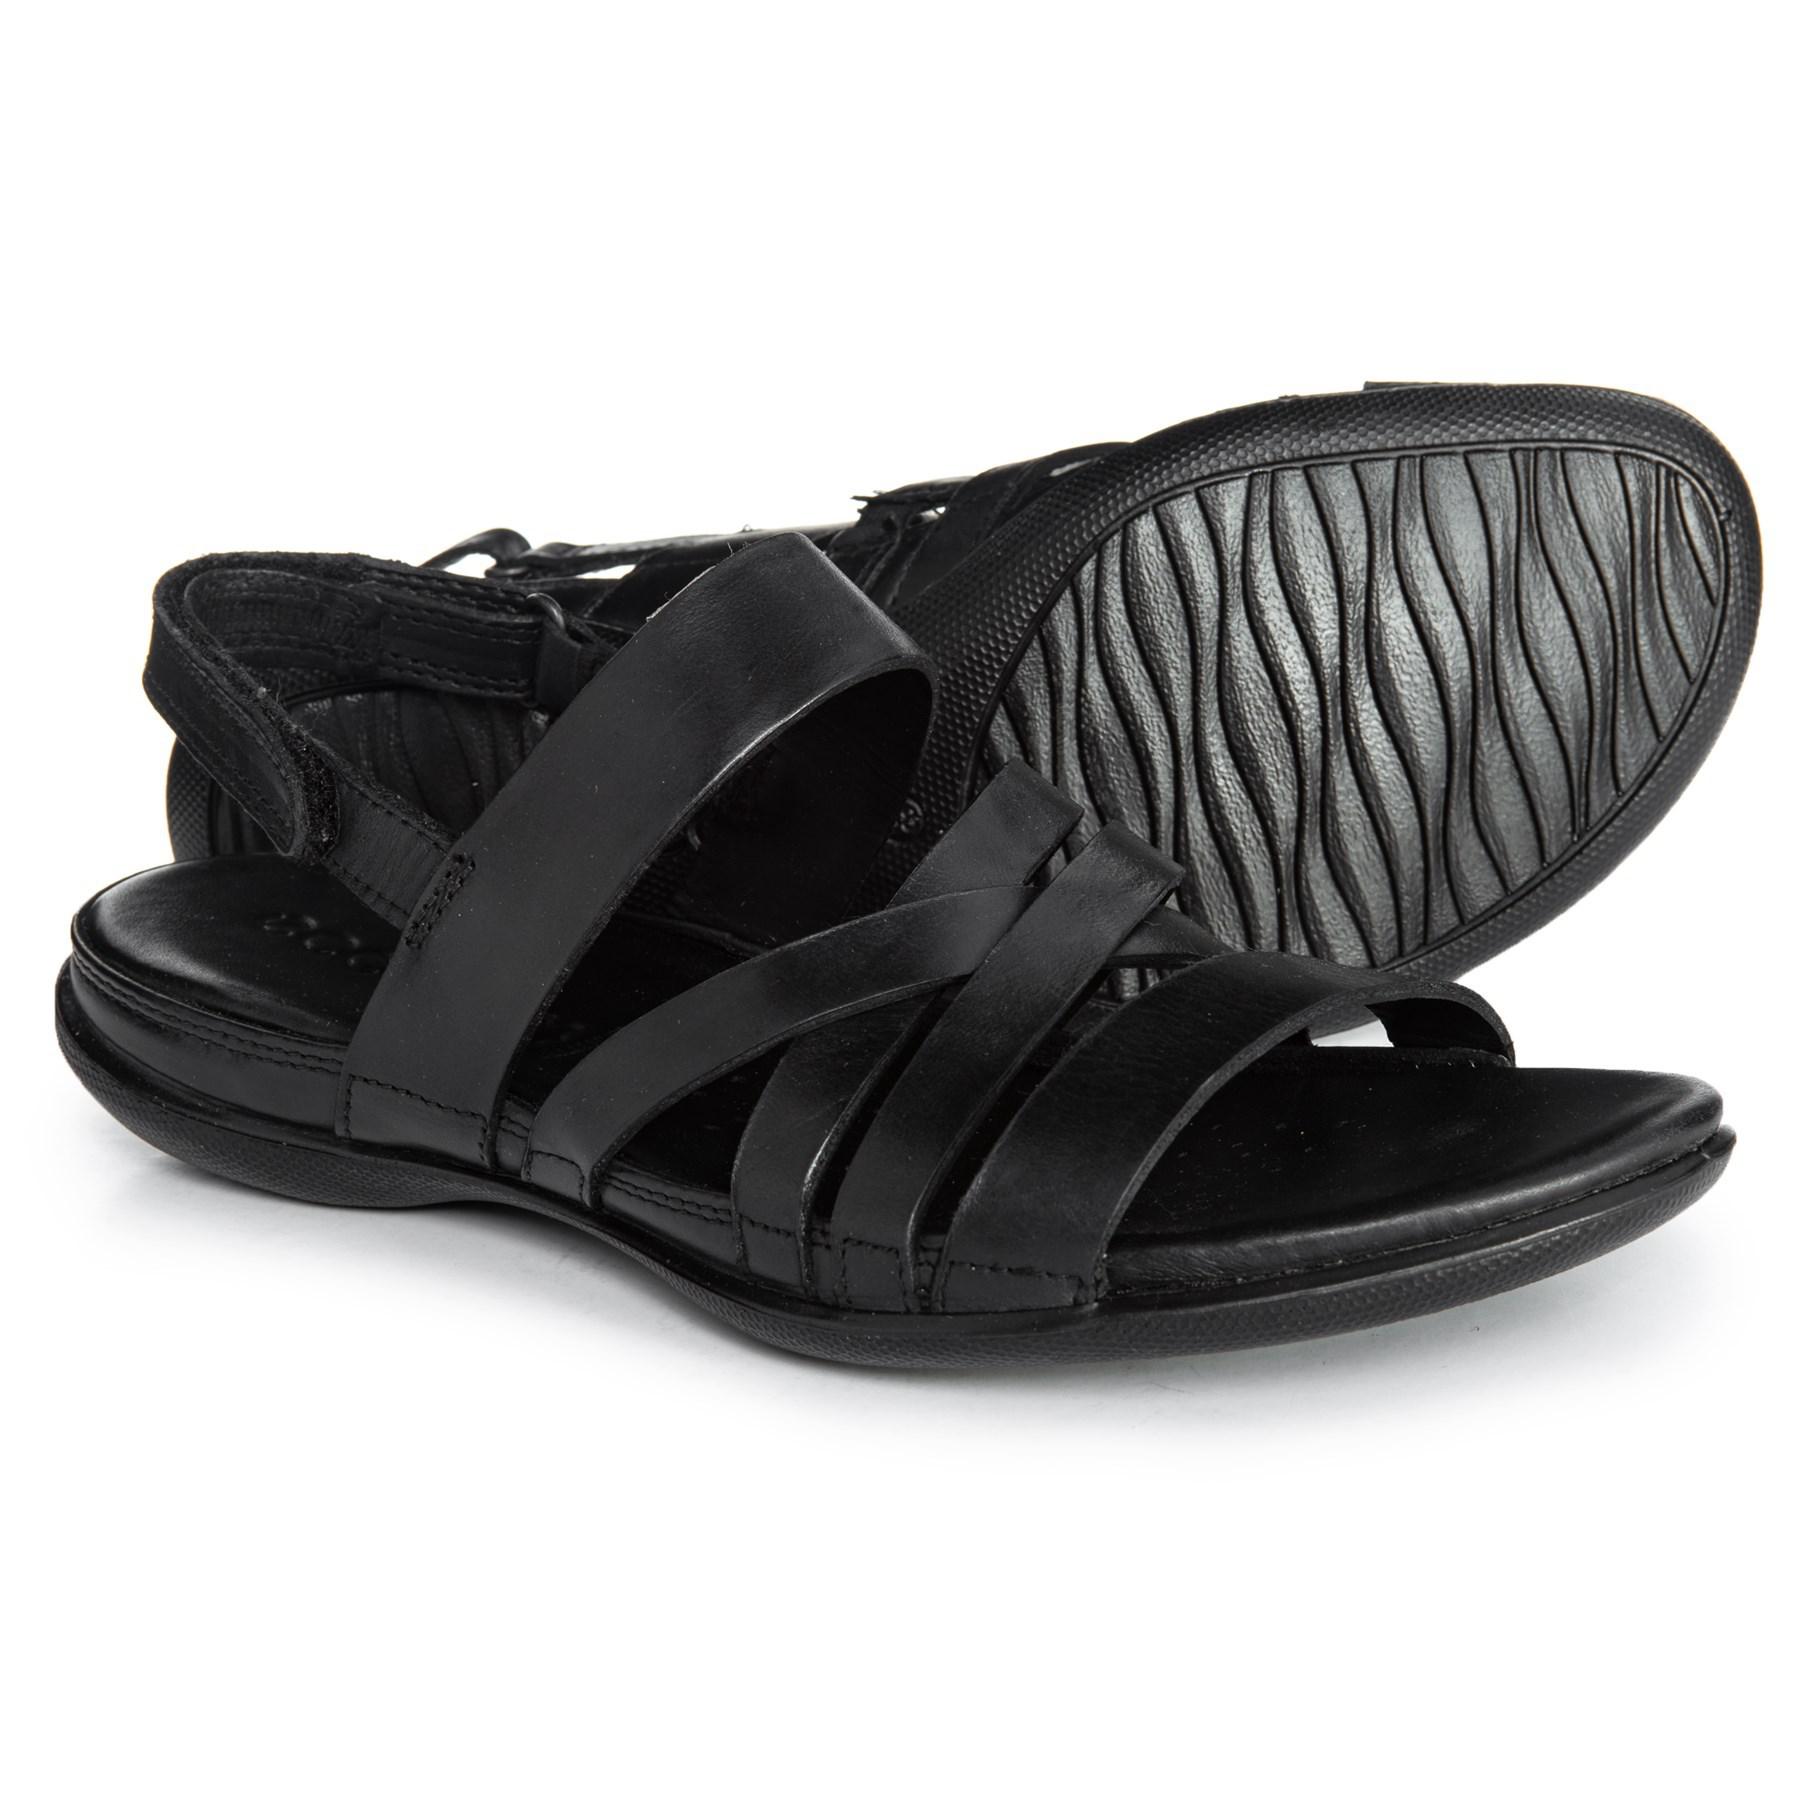 Ecco Leather Flash Sandals in Black - Lyst